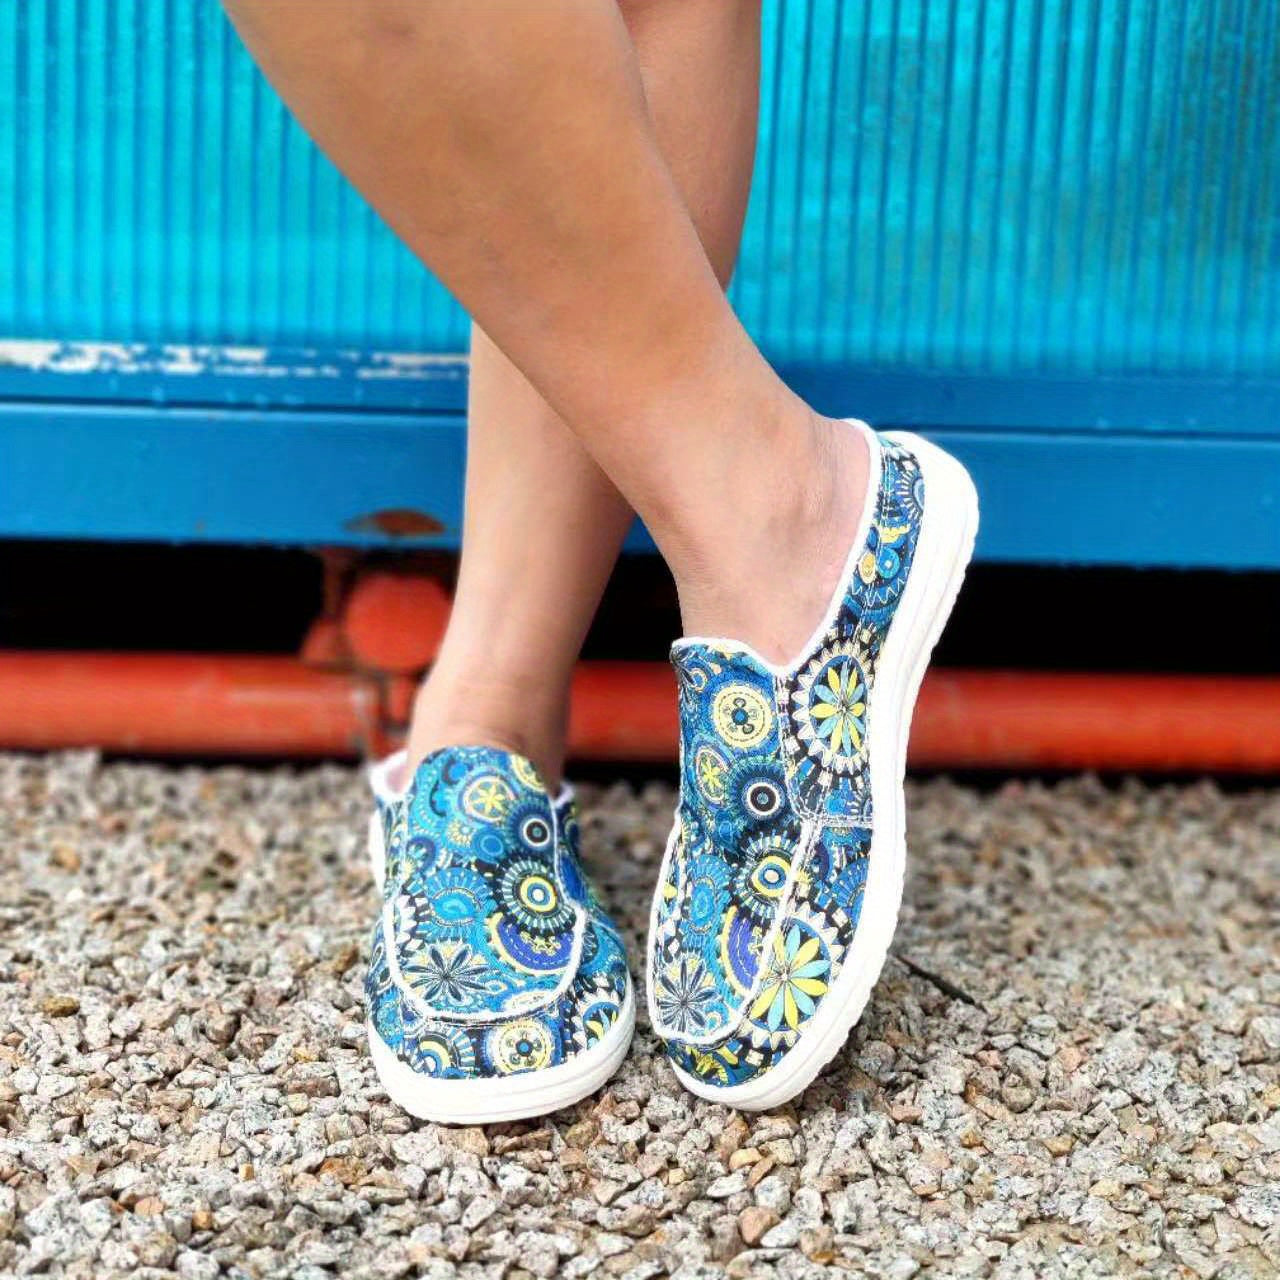 Women's Floral Print Canvas Shoes, Slip-on Round Toe Lightweight Casual Shoes, Women's Comfy Walking Flat Shoes